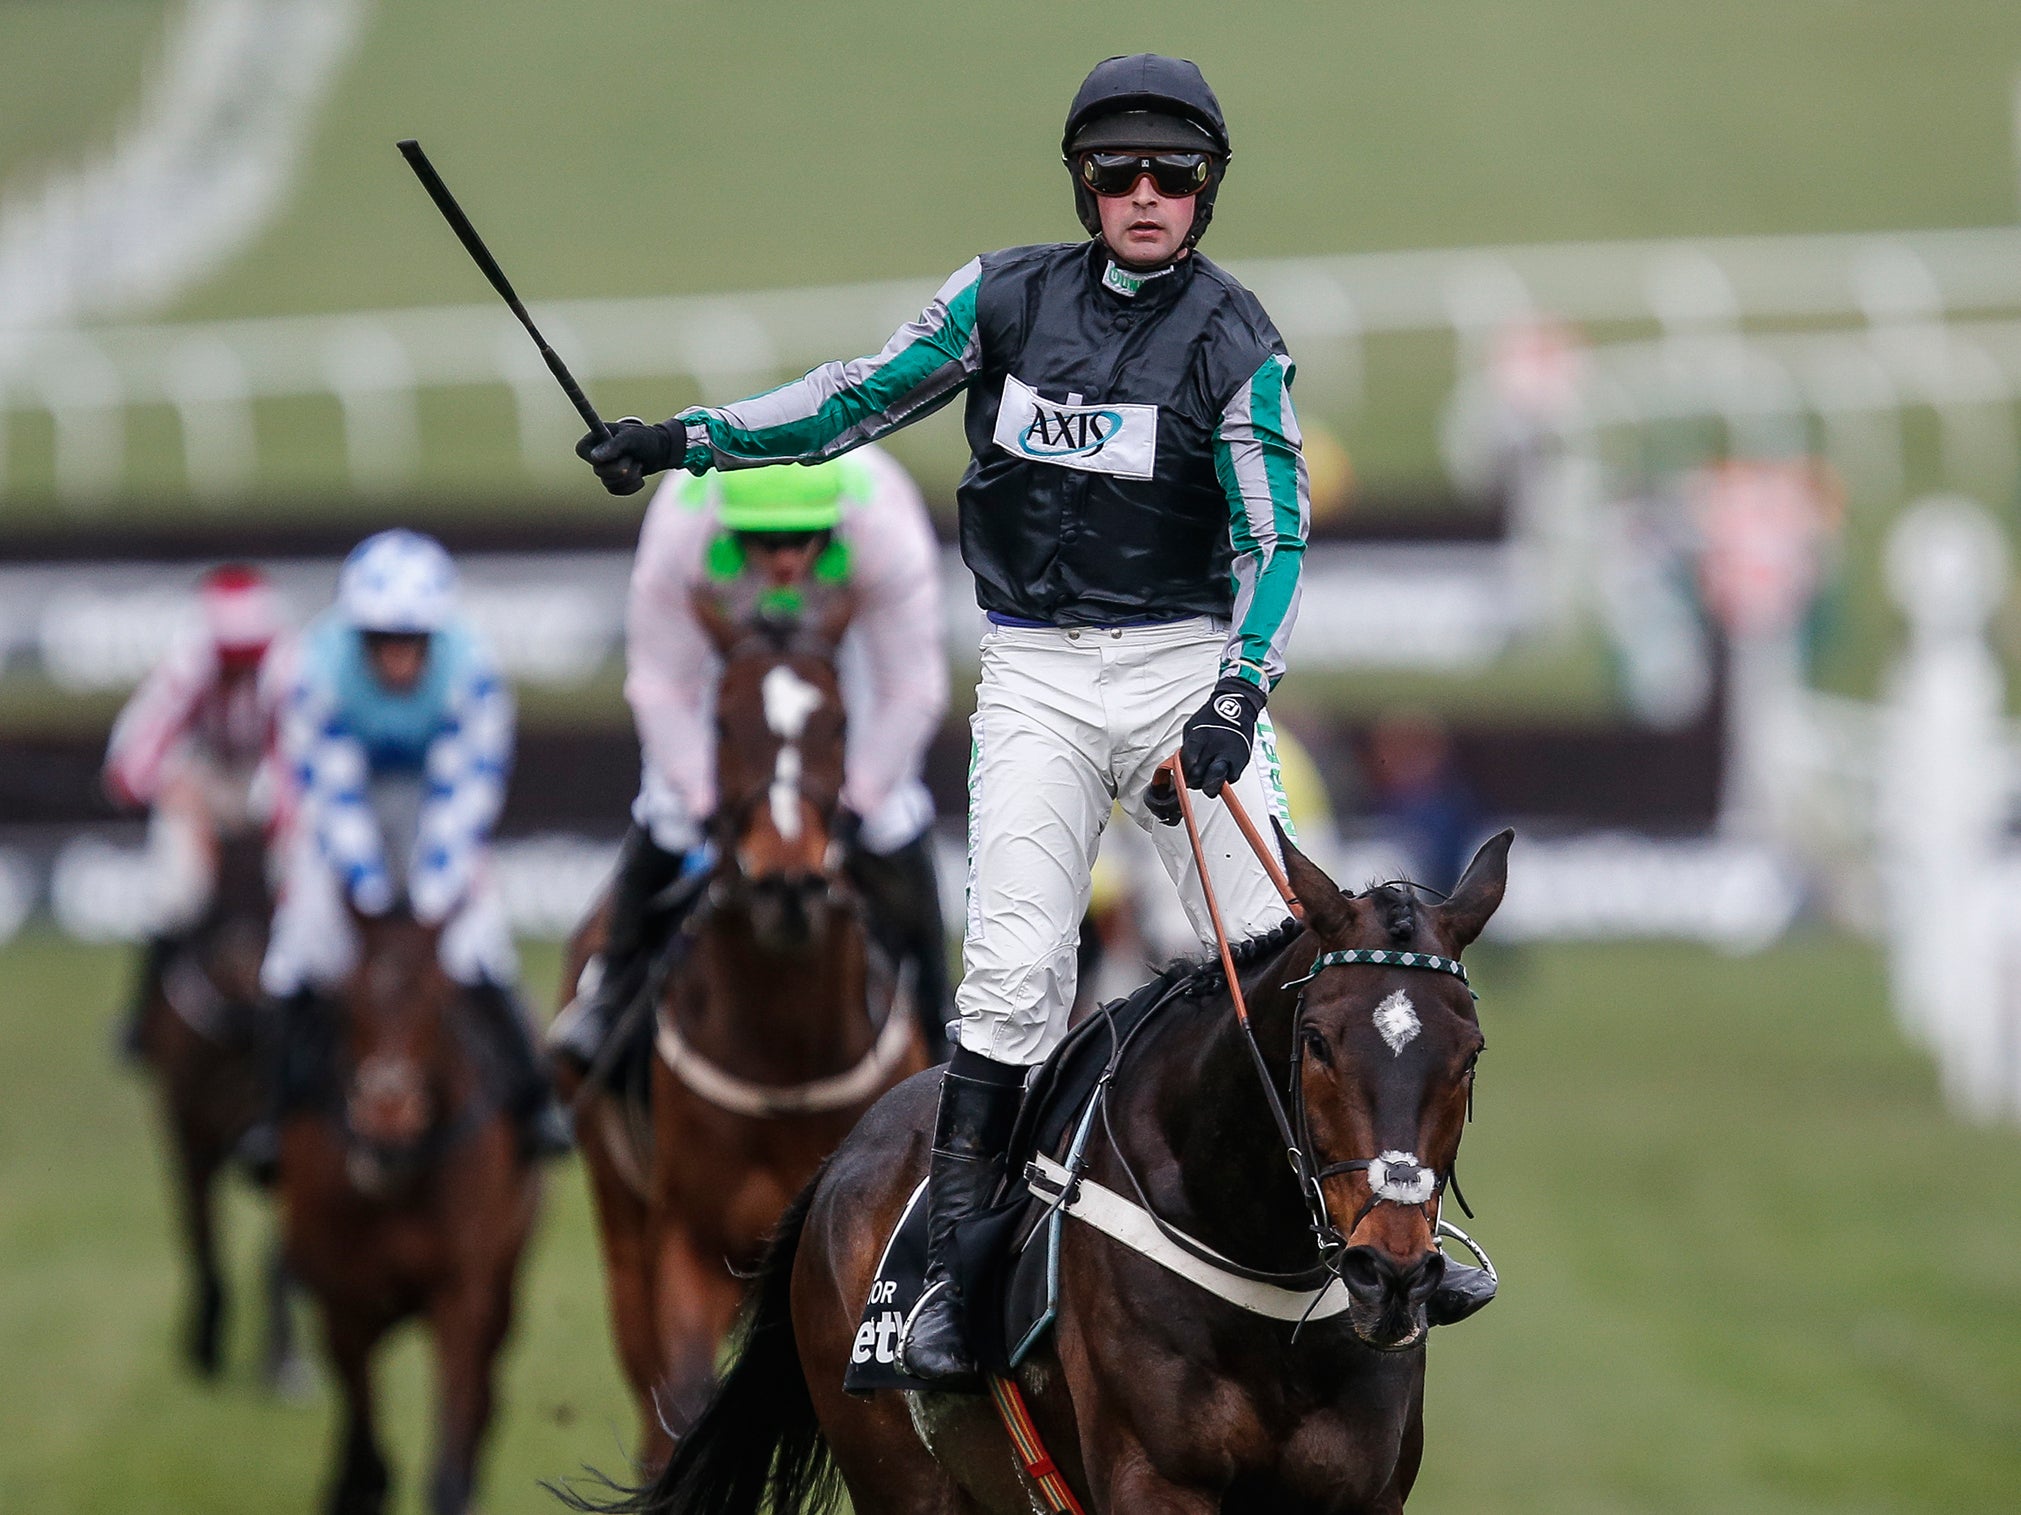 Altior and Nico de Boinville claimed the Queen Mother Champion Chase for Nicky Henderson